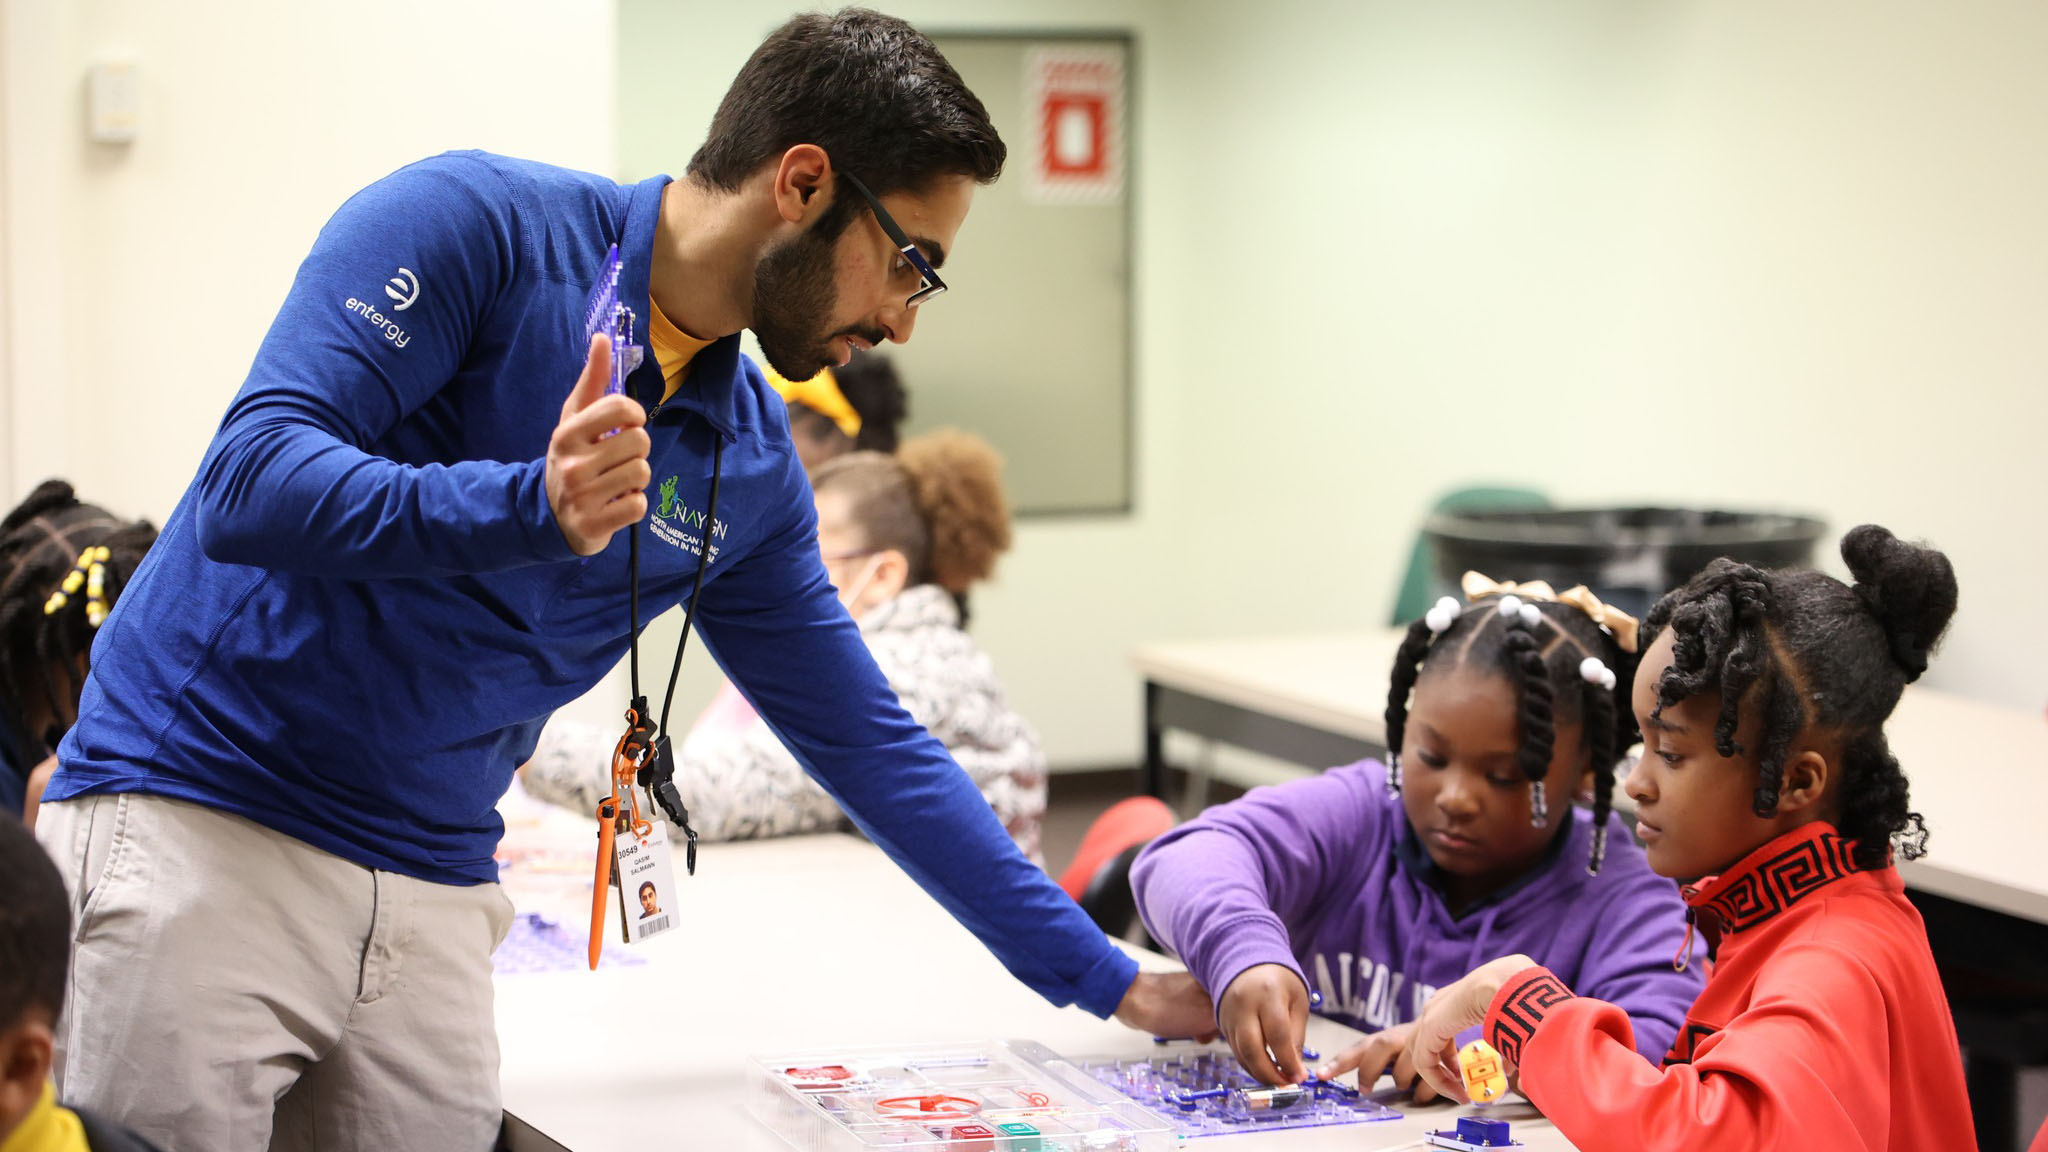 Students build snap circuits at Grand Gulf Nuclear Station